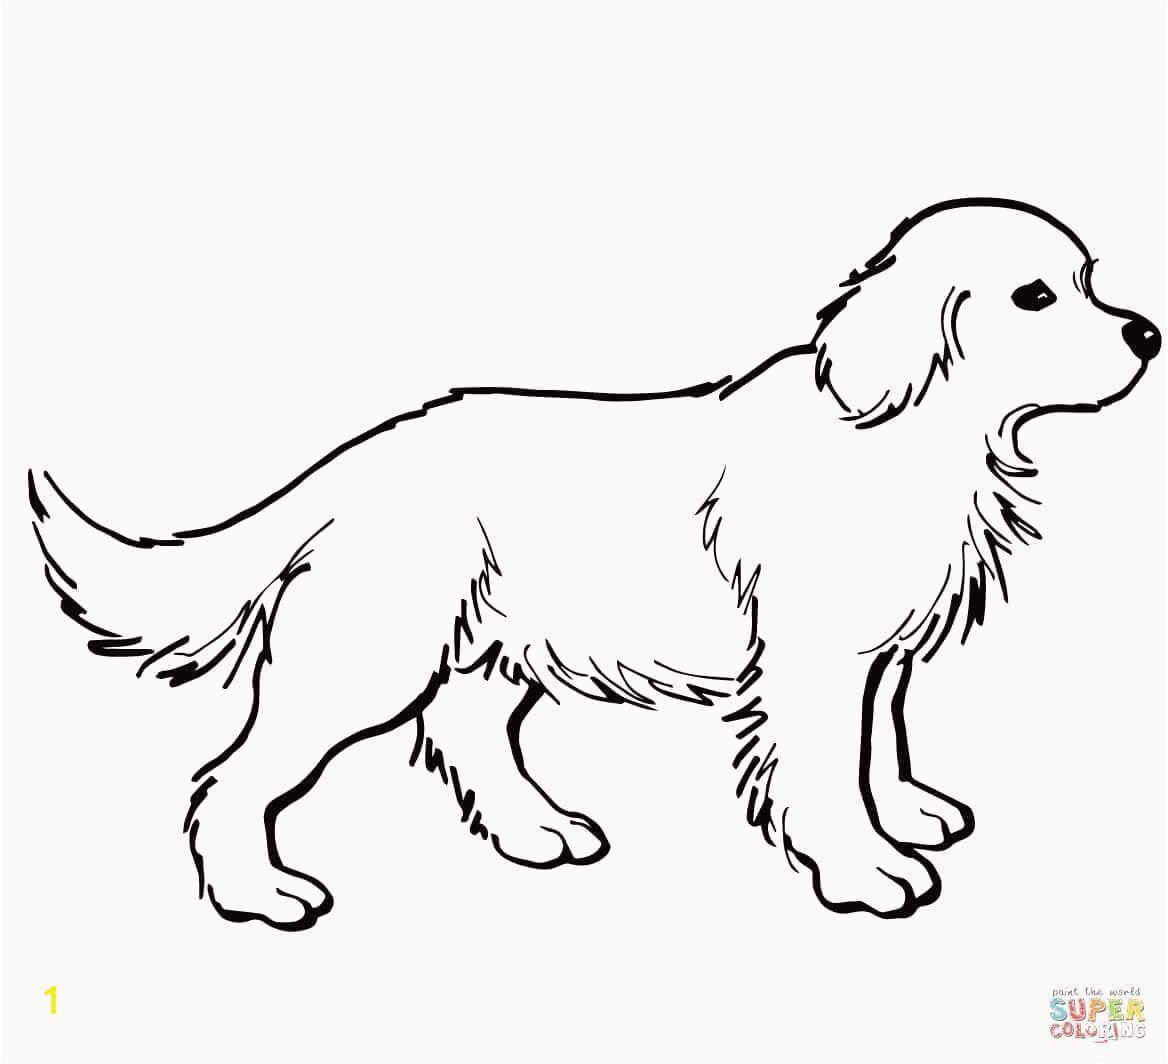 Rottweiler Puppies Coloring Pages Rottweiler Puppies Coloring Pages Amazing 15 Best Boxer Puppy